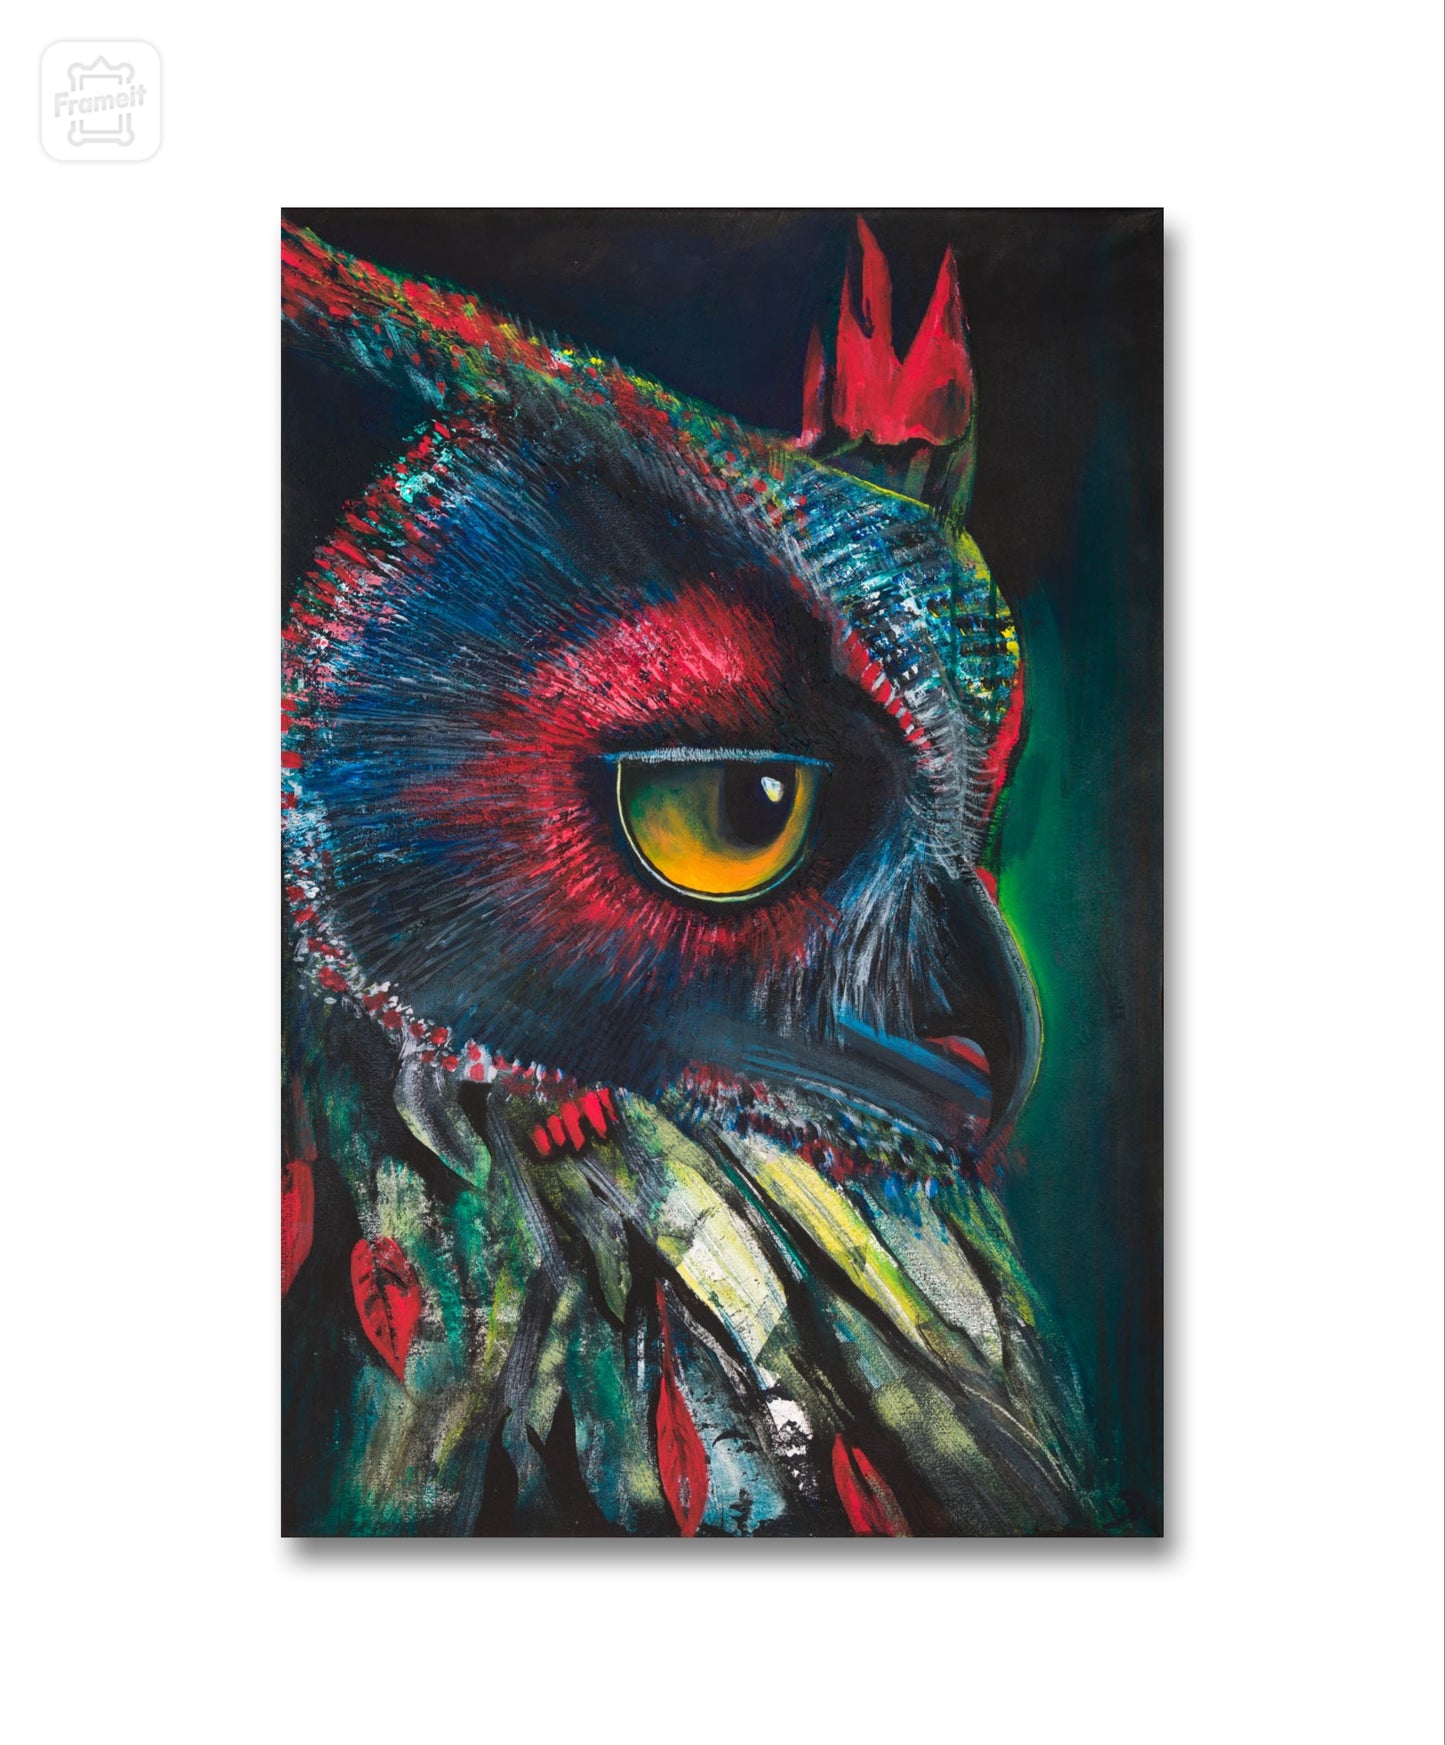 Night’s Majesty- Gallery Wrapped canvas print